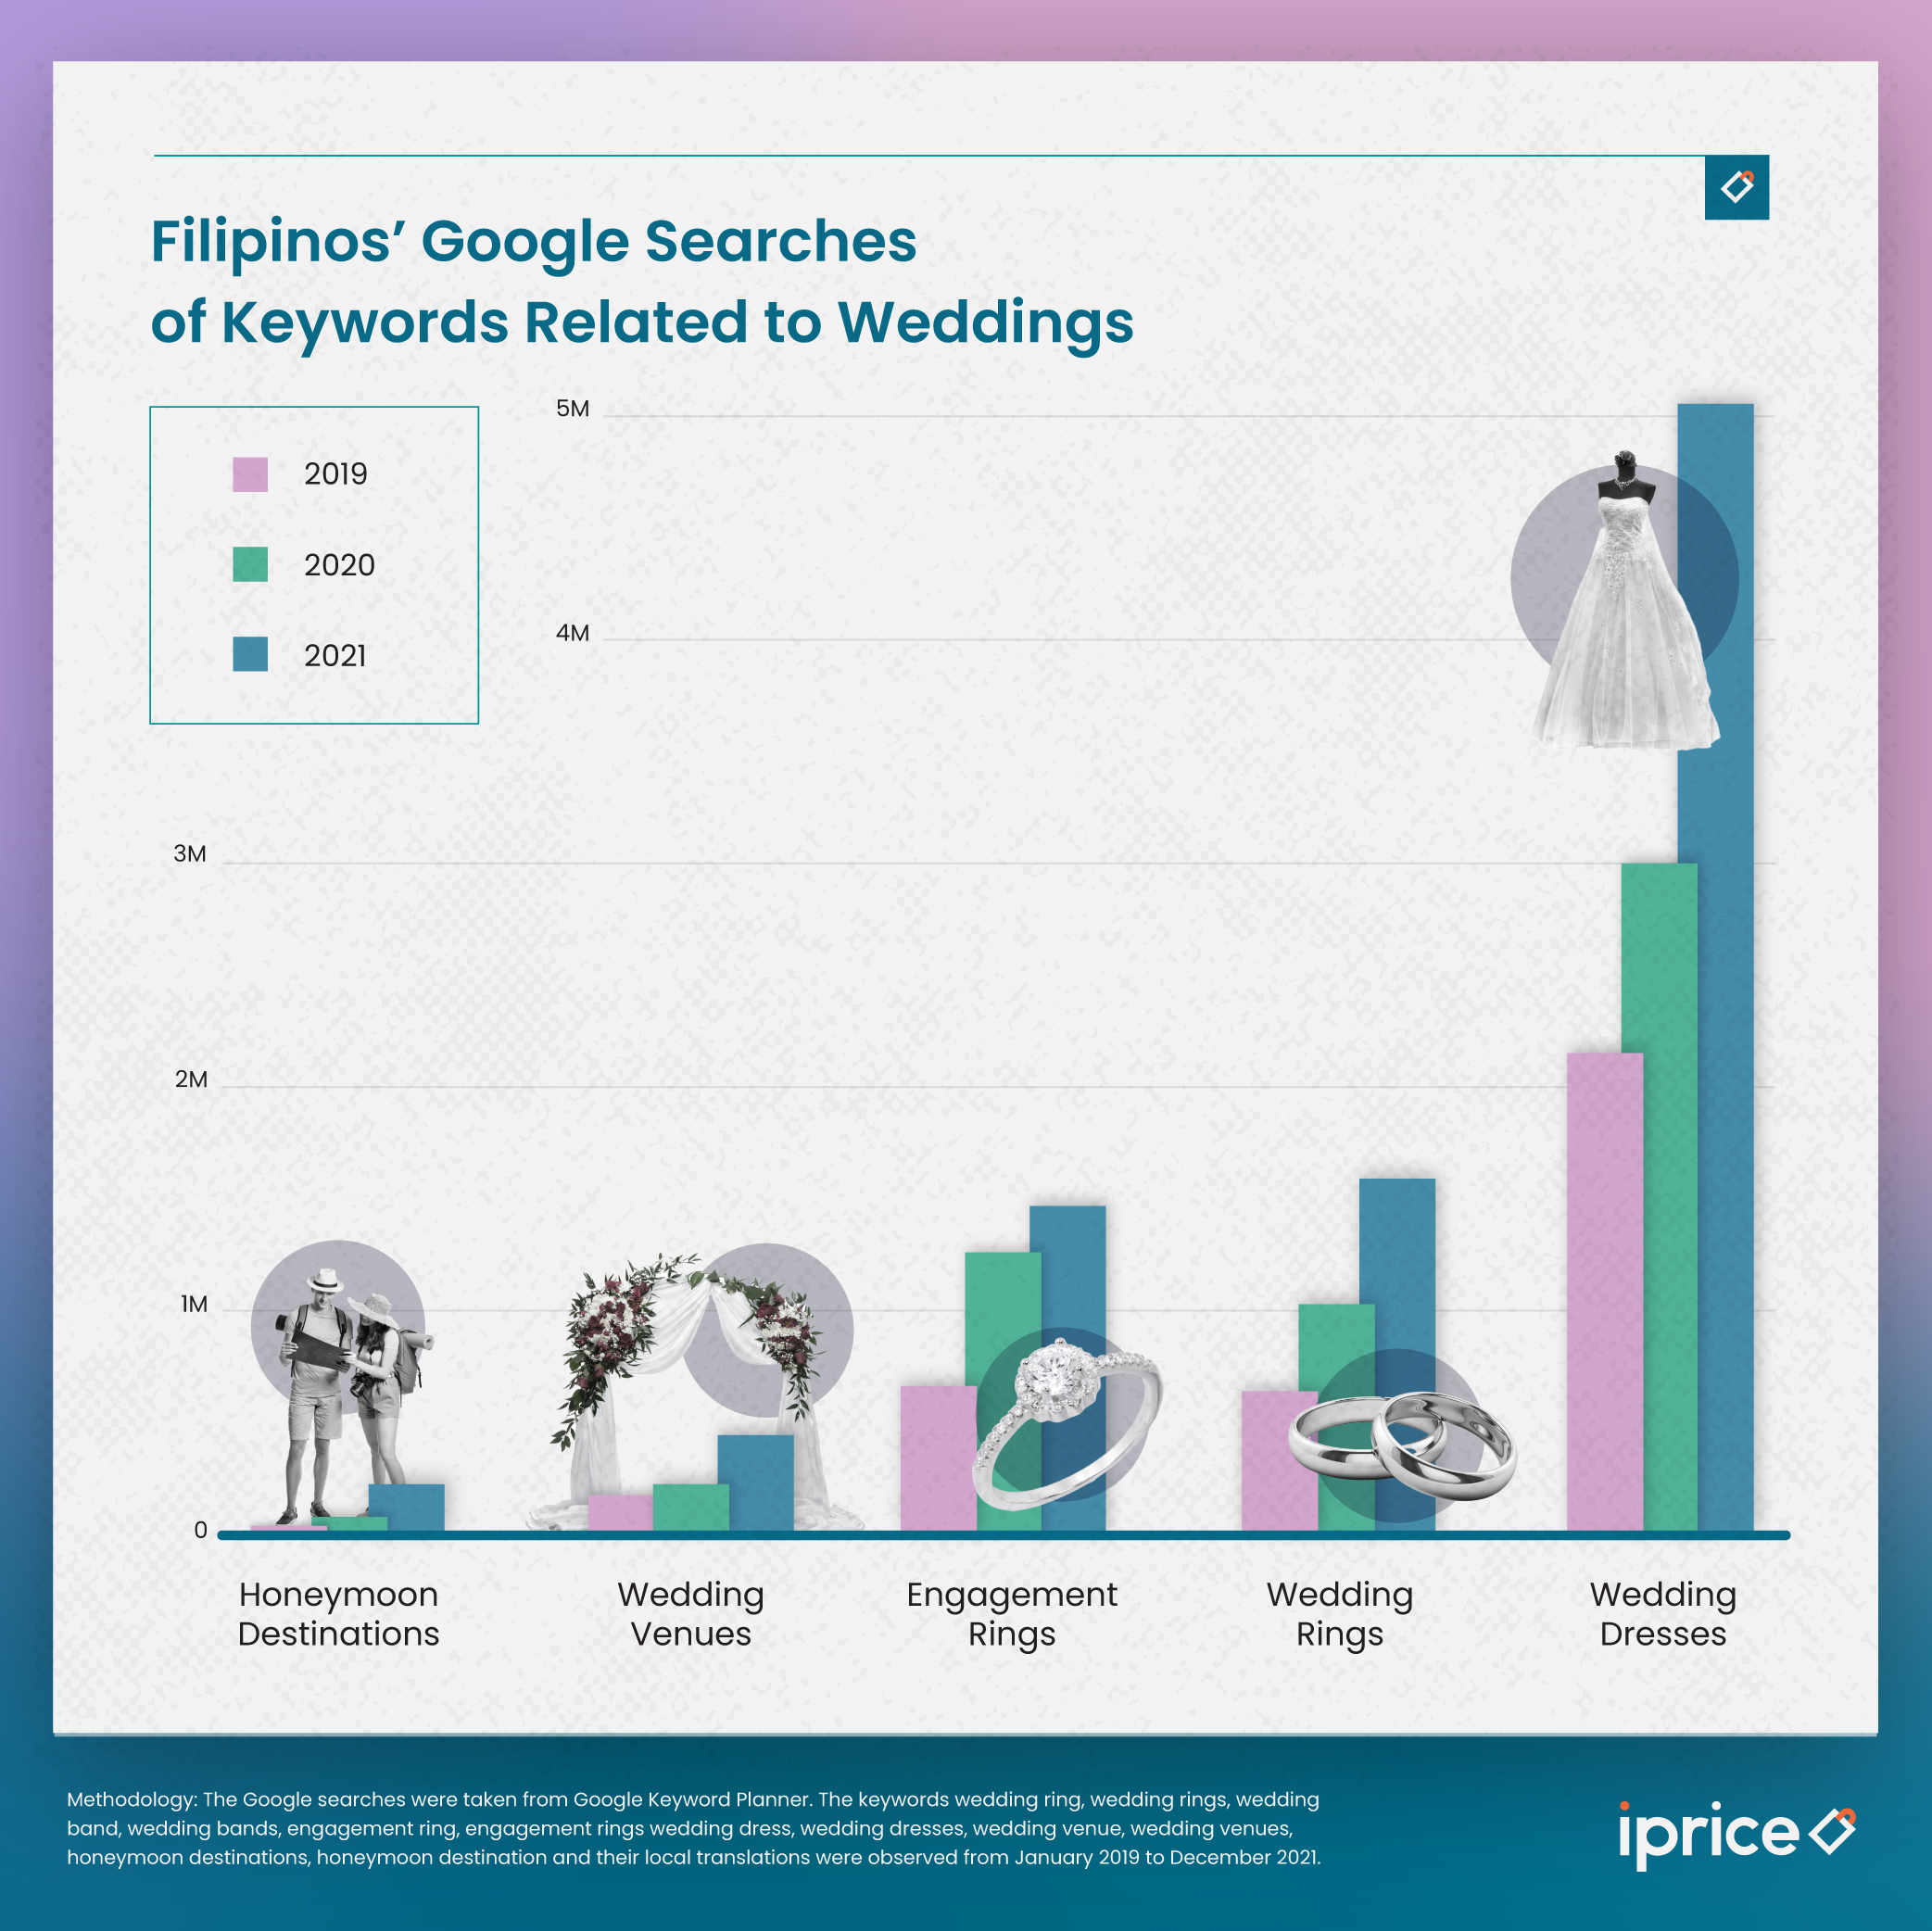 Google Searches for Wedding-Related Keywords